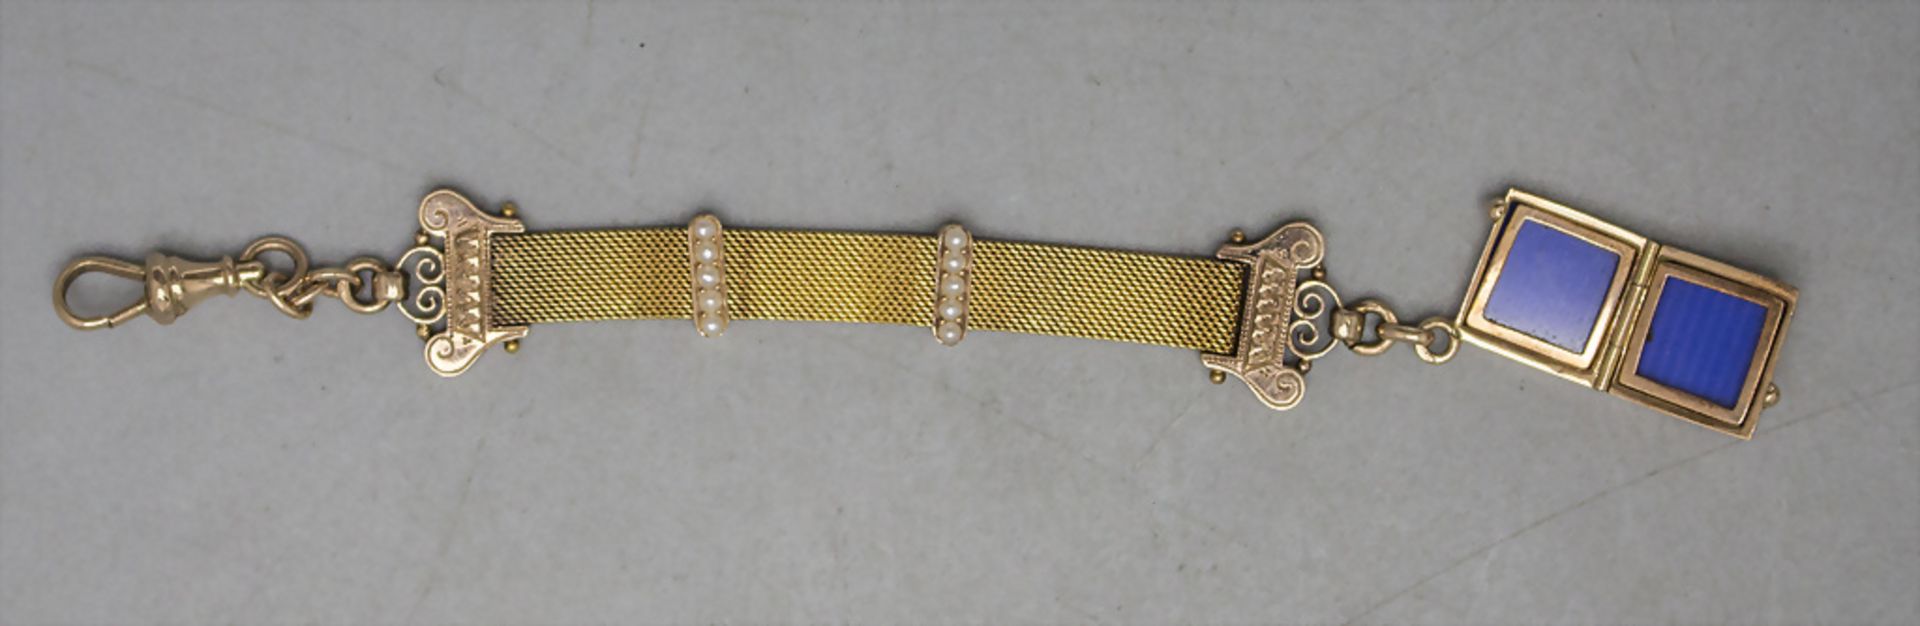 Chatelaine / Uhrenkette in Gold / A 14 ct gold watch chain, 19. Jh. - Image 6 of 6